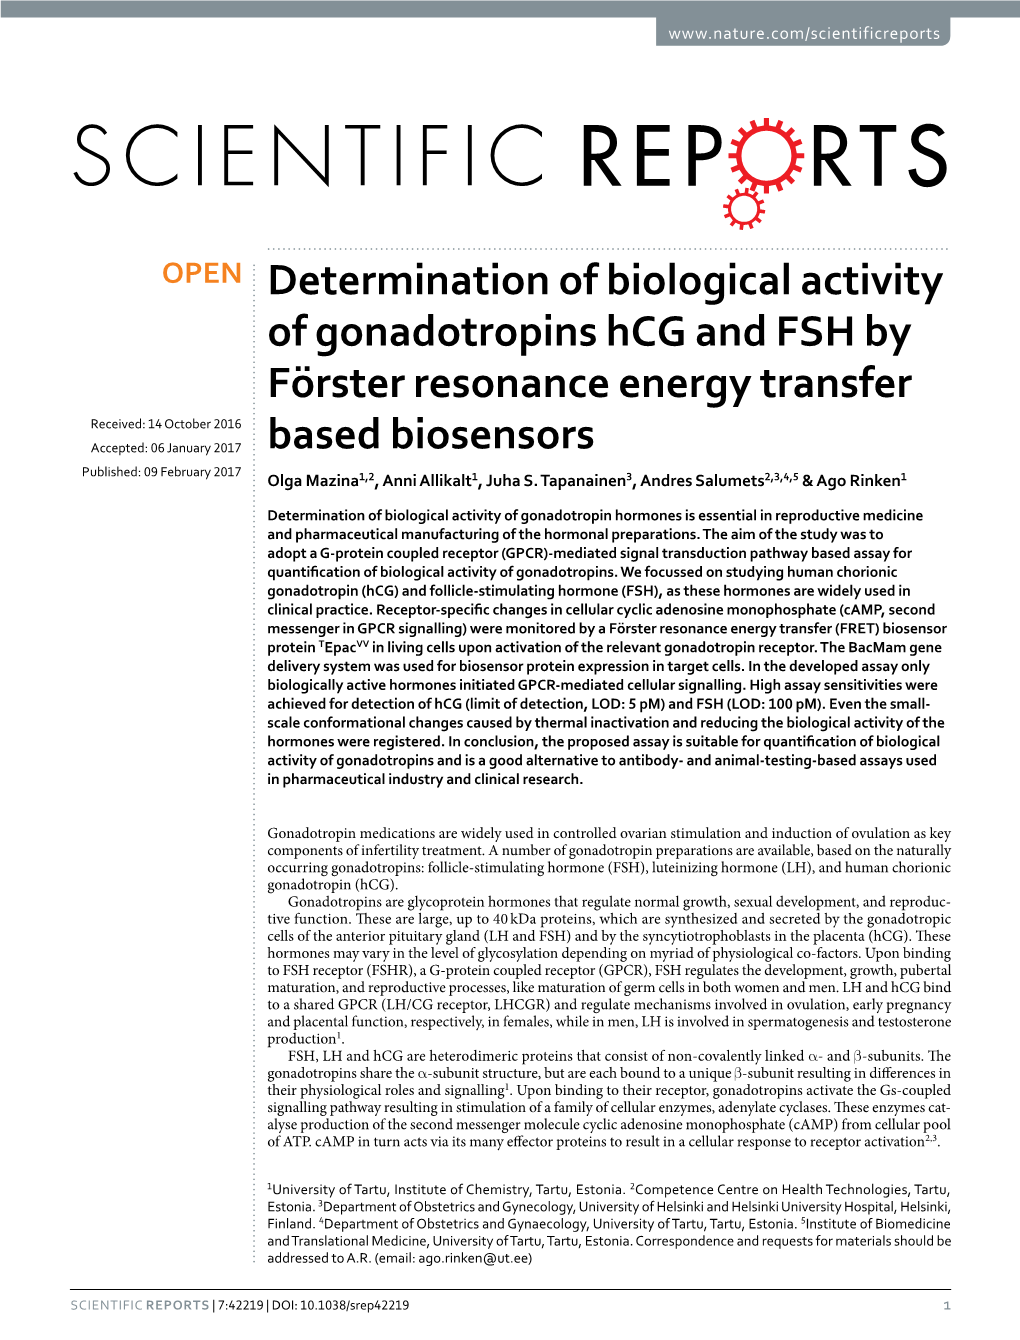 Determination of Biological Activity of Gonadotropins Hcg and FSH By